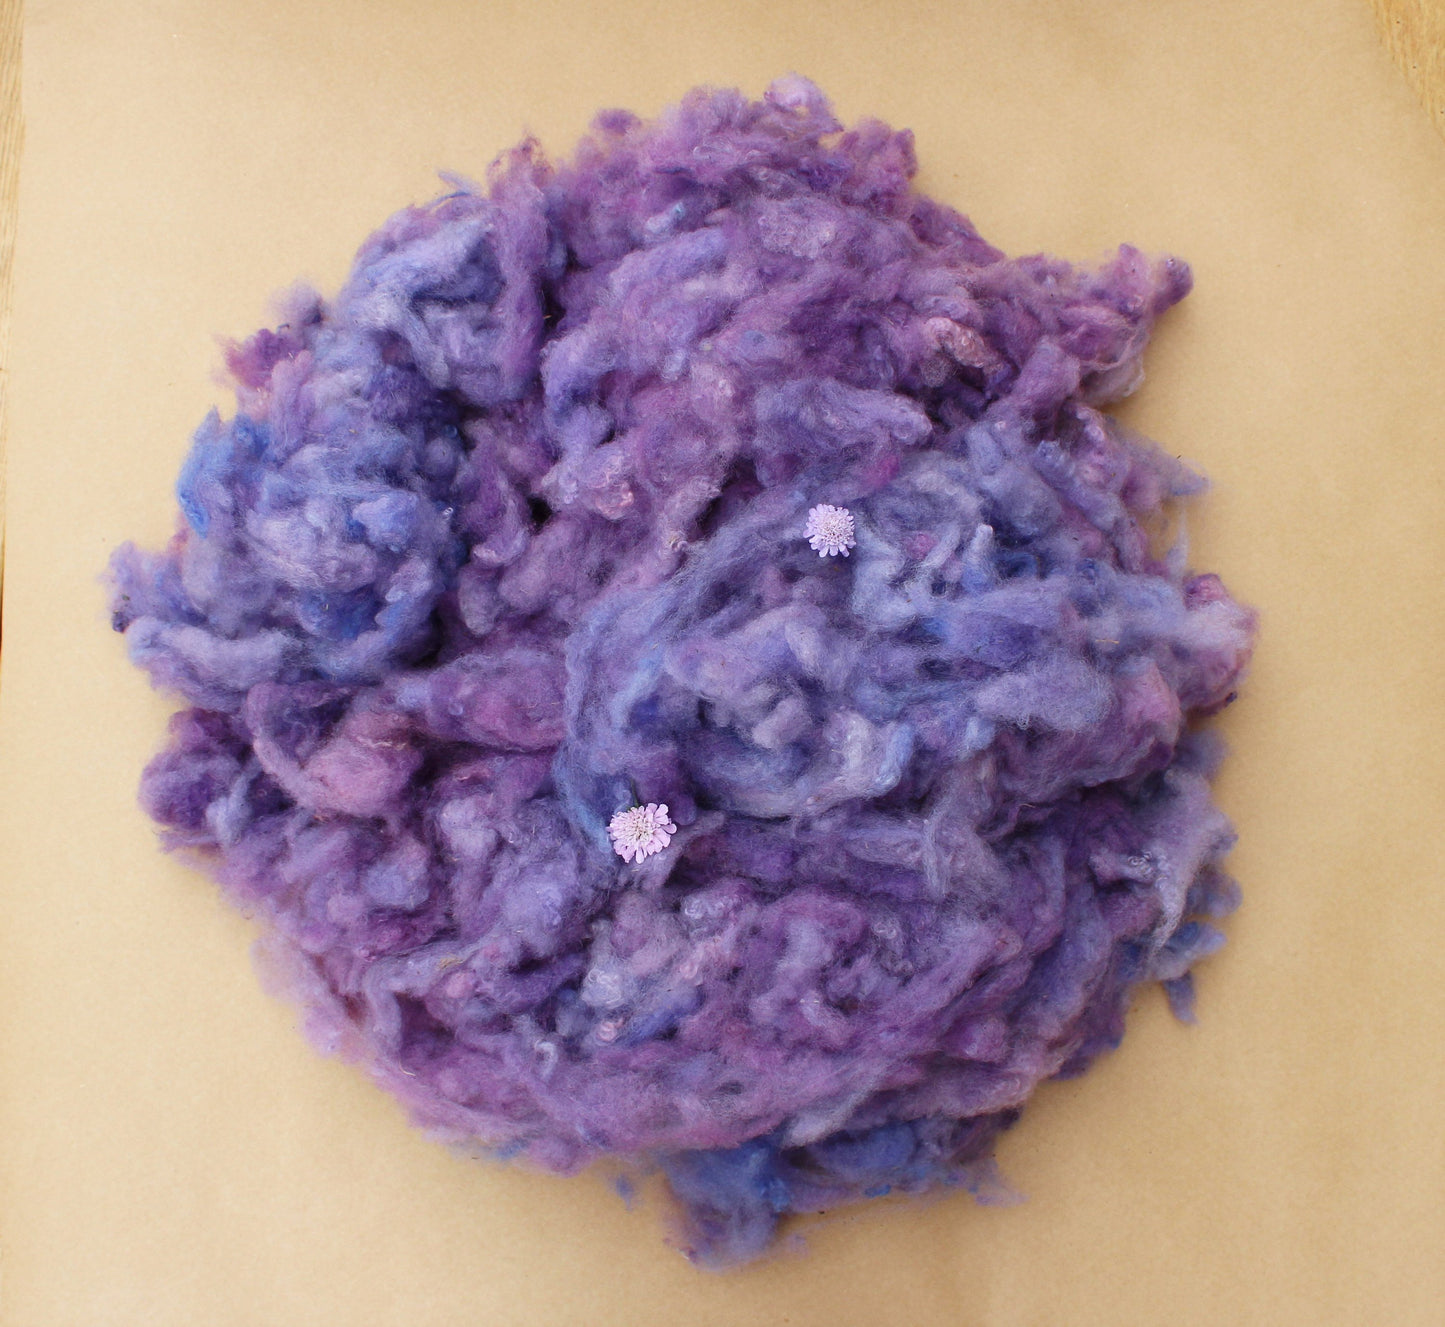 Hand-dyed Border Leicester Wool - Picked and Dyed Wool - 1 OZ